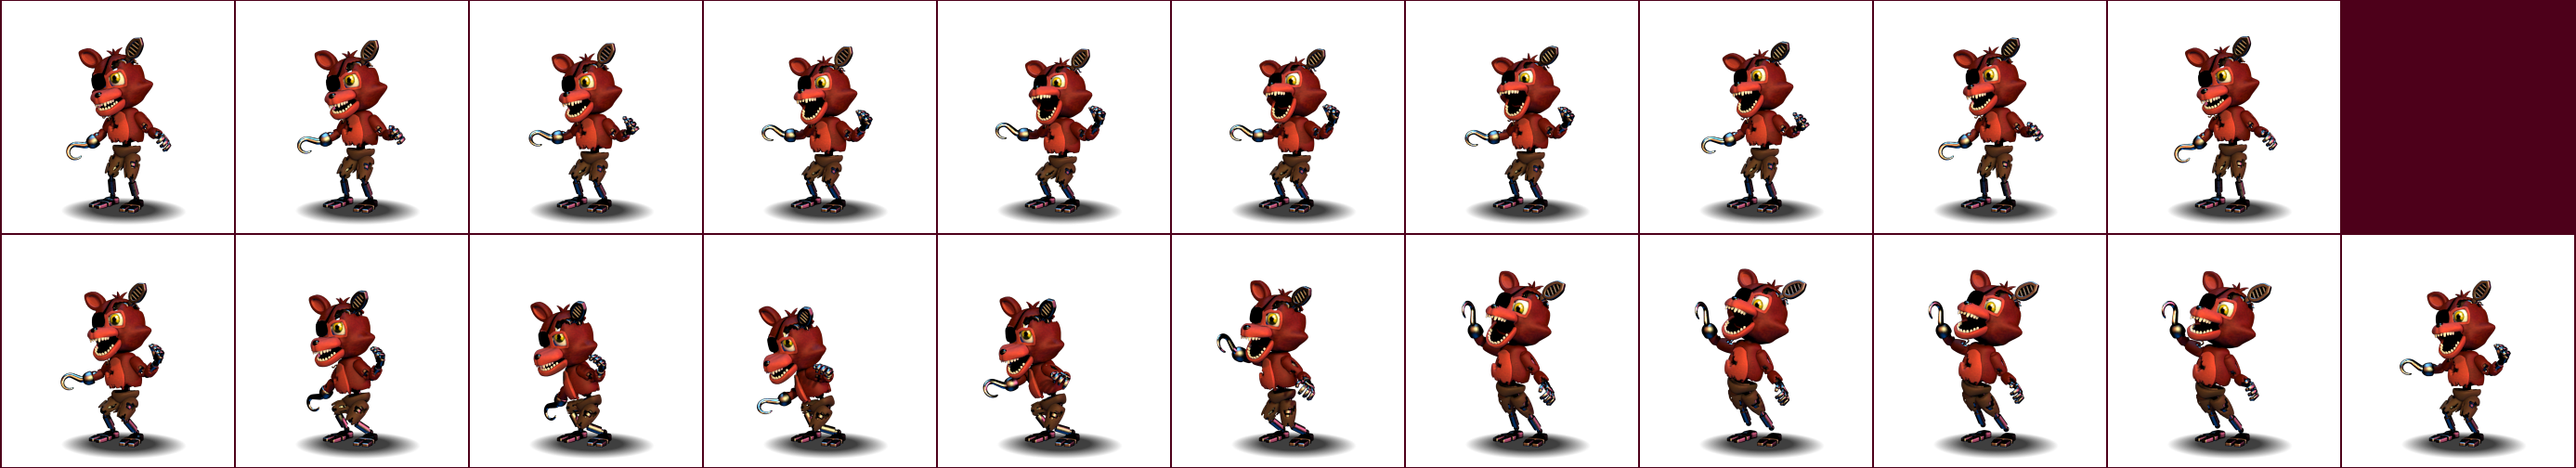 FNaF World - Withered Foxy